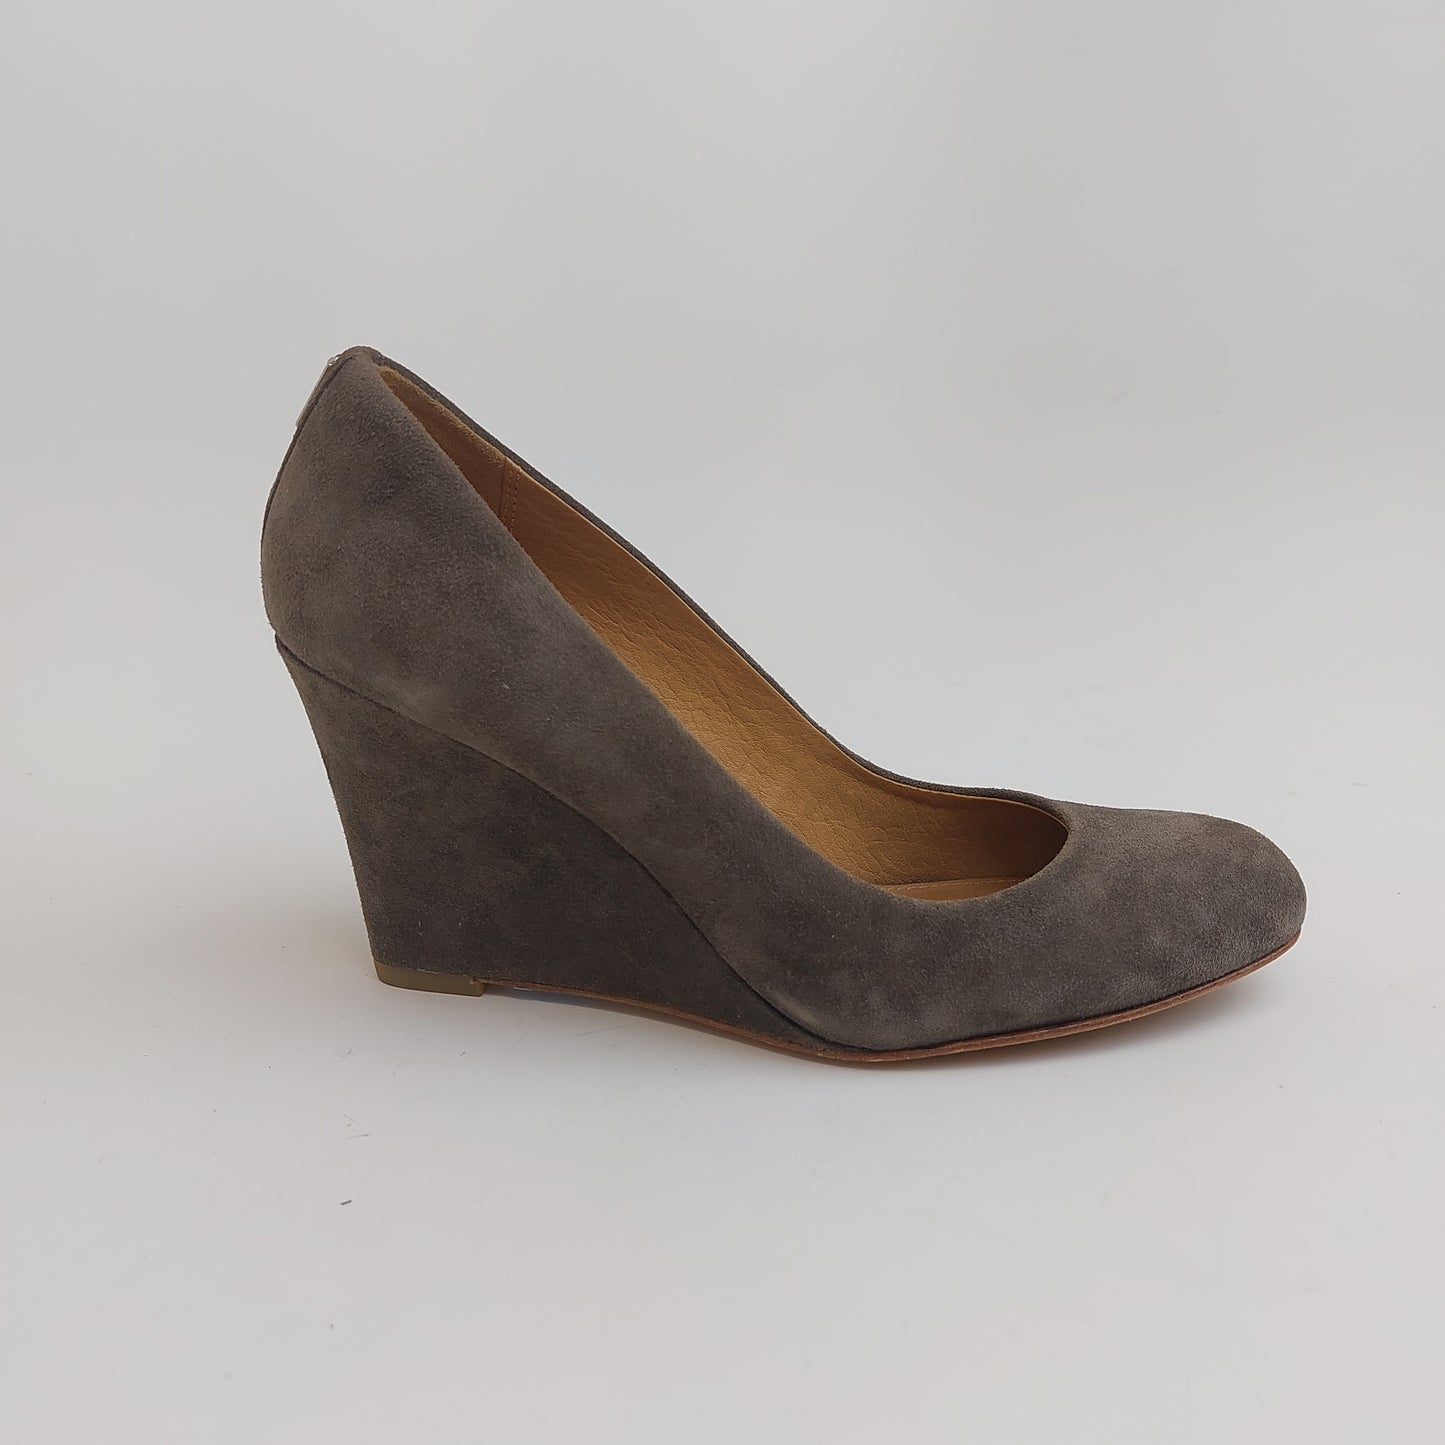 Coach Rileigh Suede Wedges Womens US Size 5 Gray Pumps w/ Box